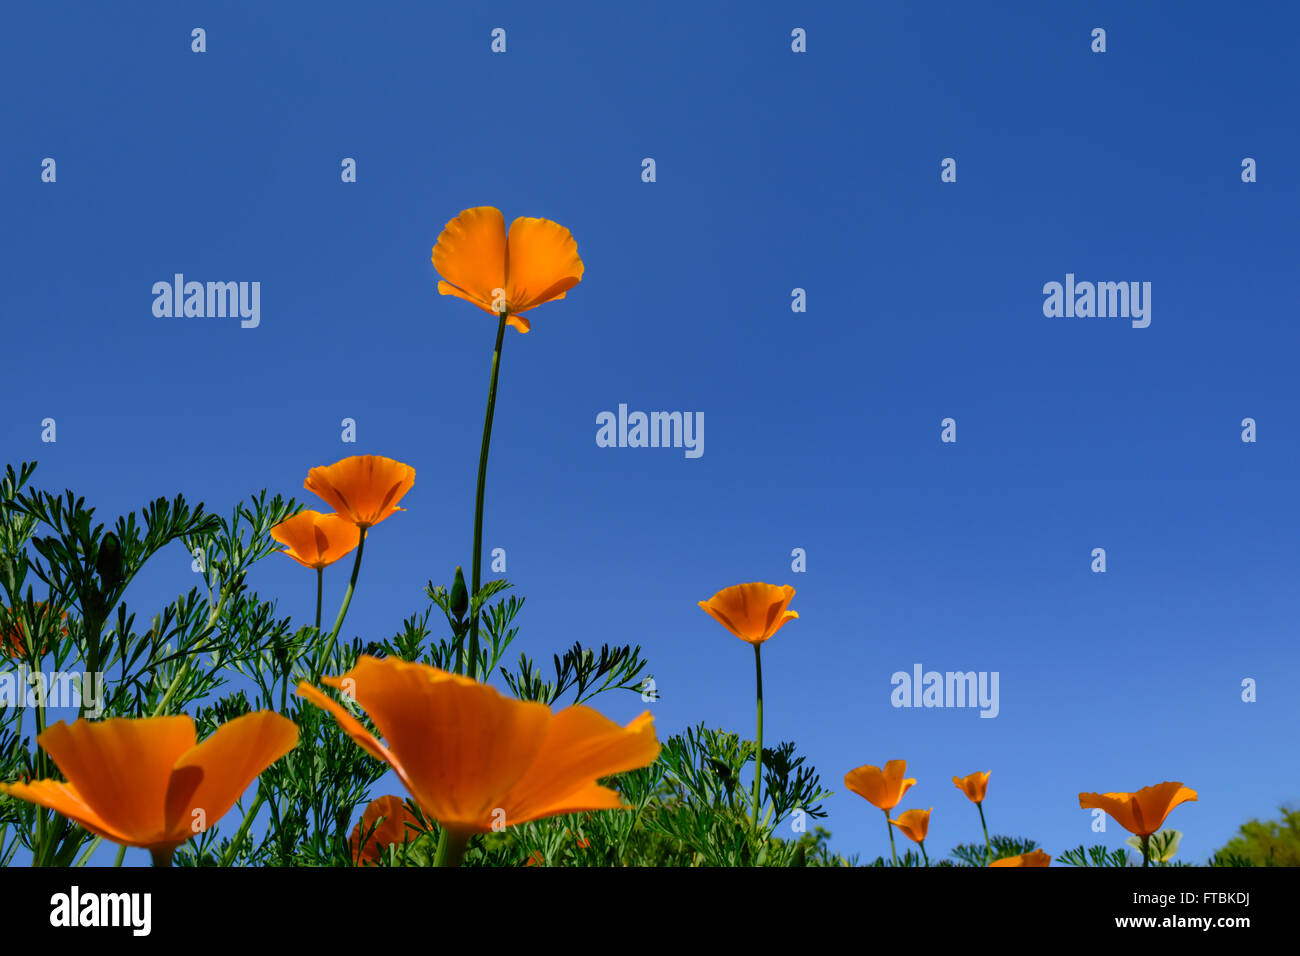 Orange California Poppy flowers standing solitary against blue sky background. Stand Up, Stand Out, Stand Tall Stock Photo